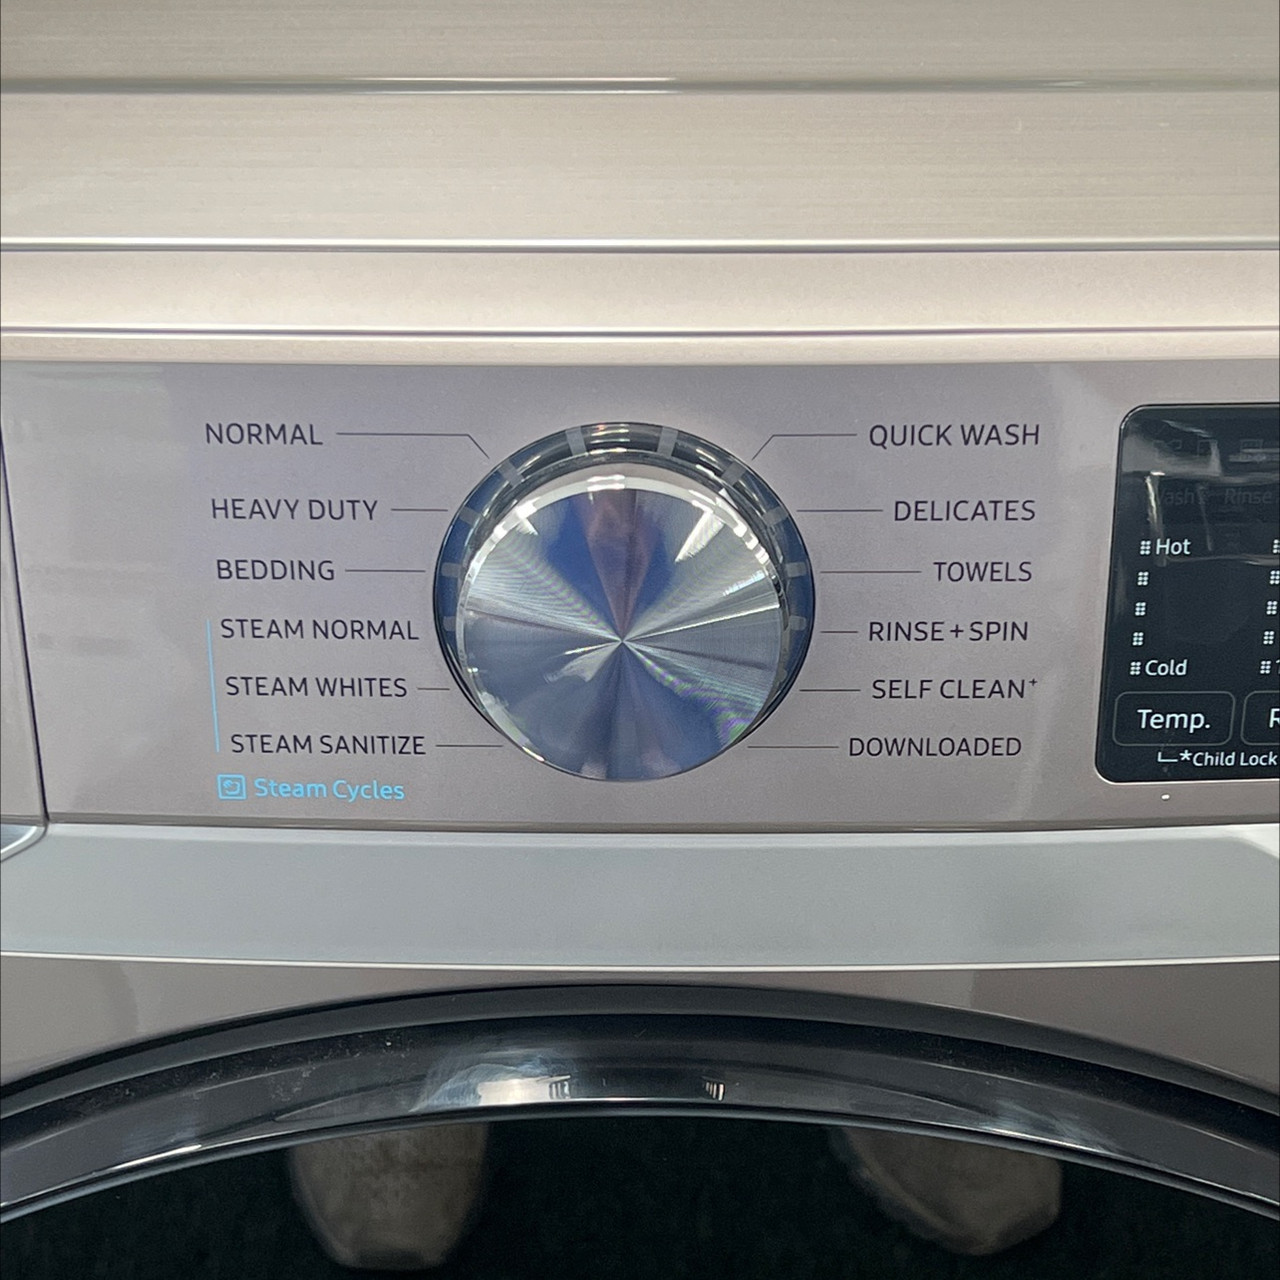 WF45B6300AC, Samsung, 4.5 cu. ft. Large Capacity Smart Front Load Washer  with Super Speed Wash - Champagne